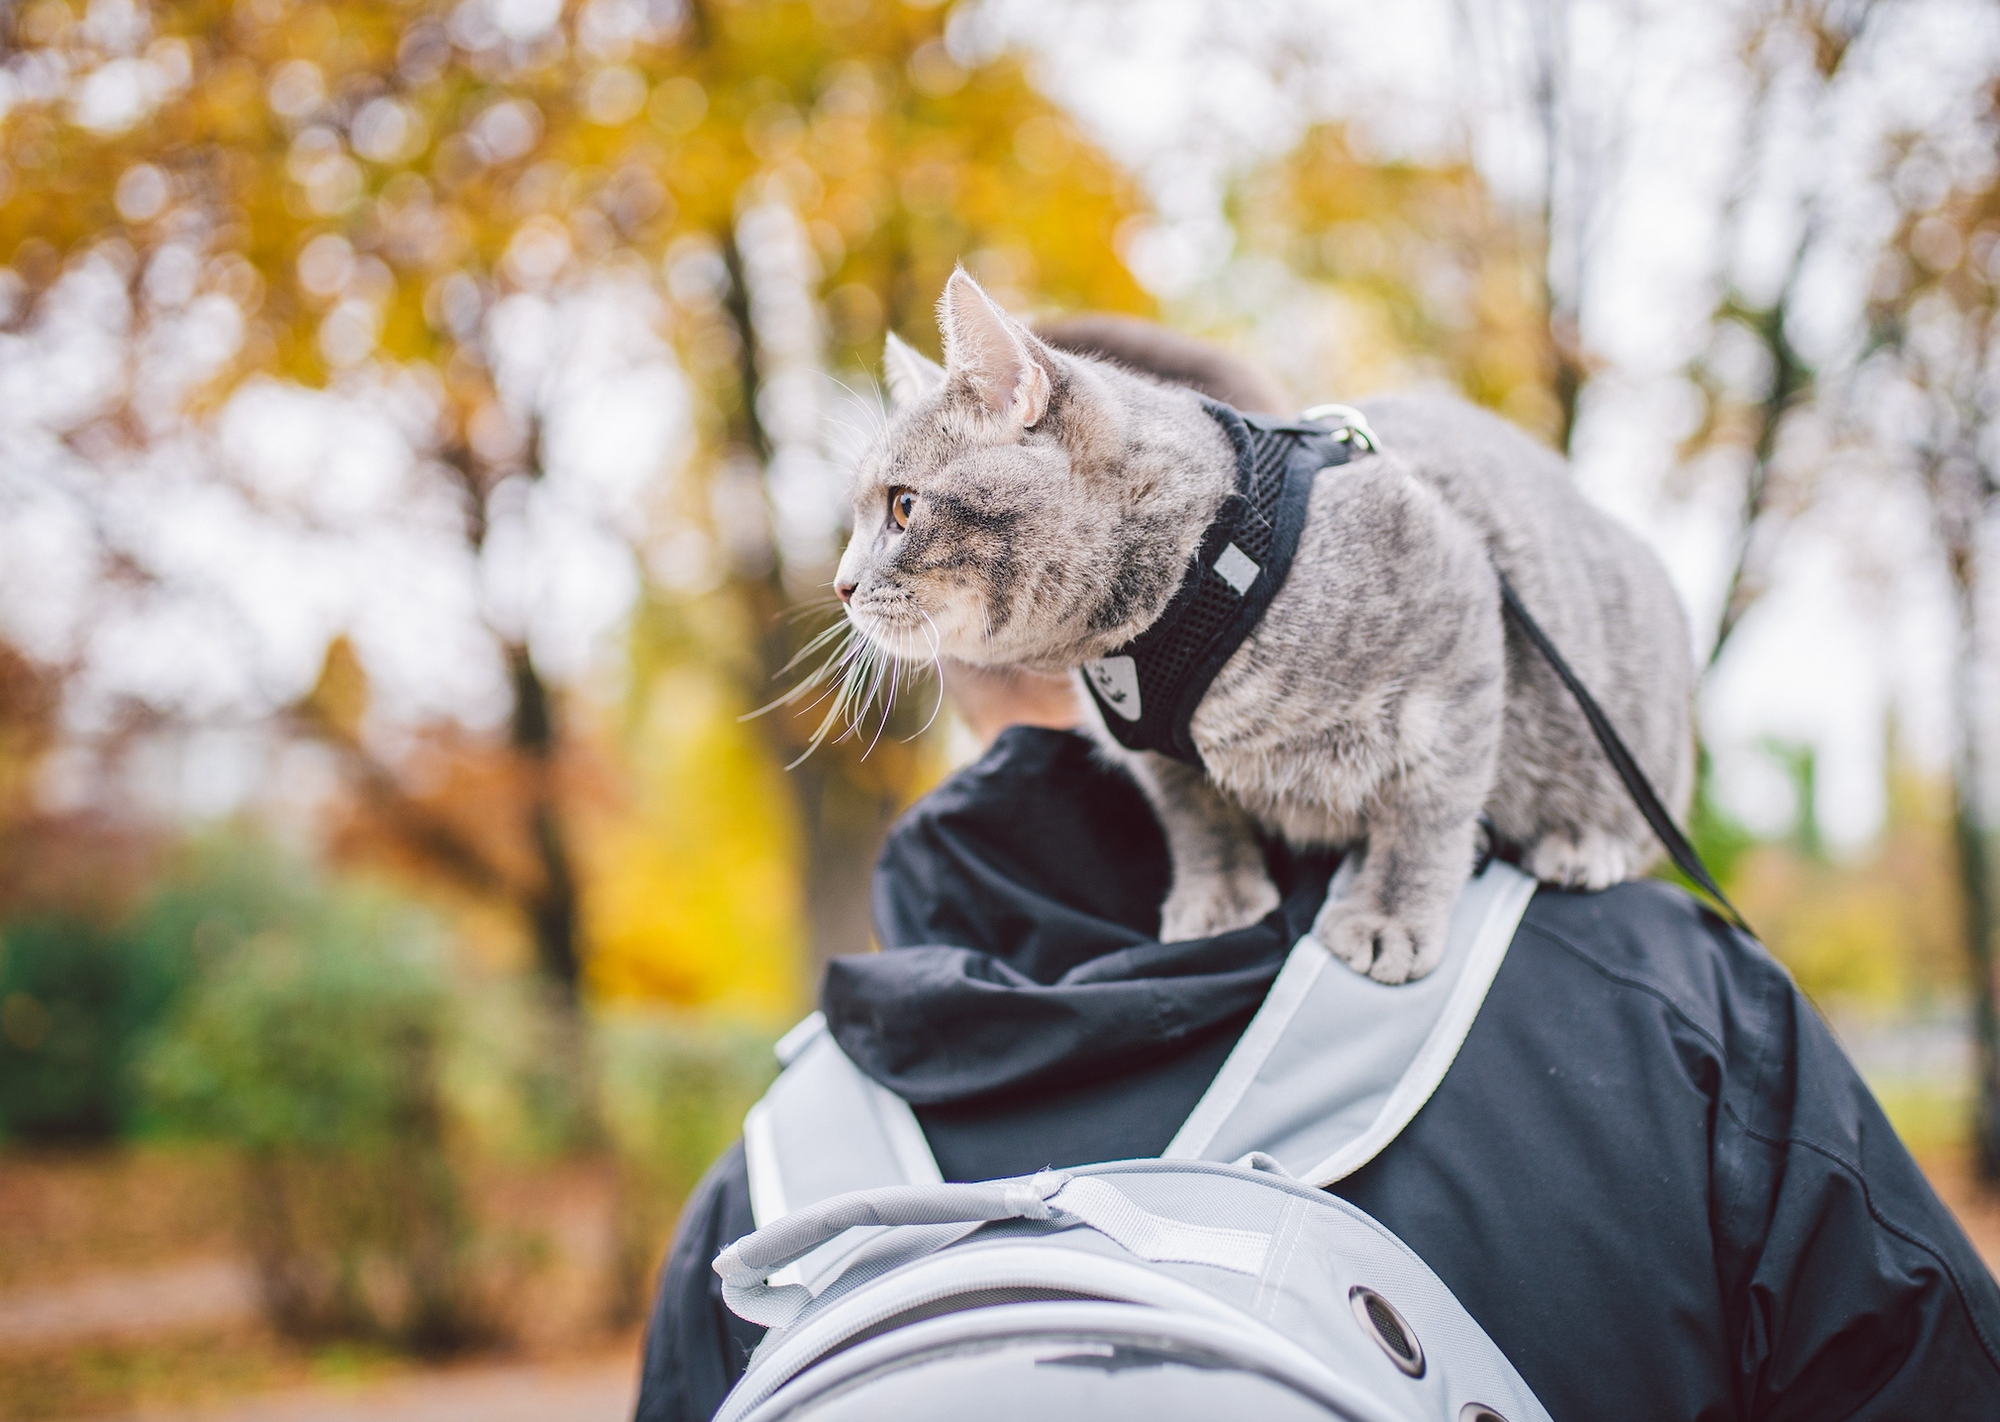 A cat sitting on a person's shoulder with a backpack nearby.